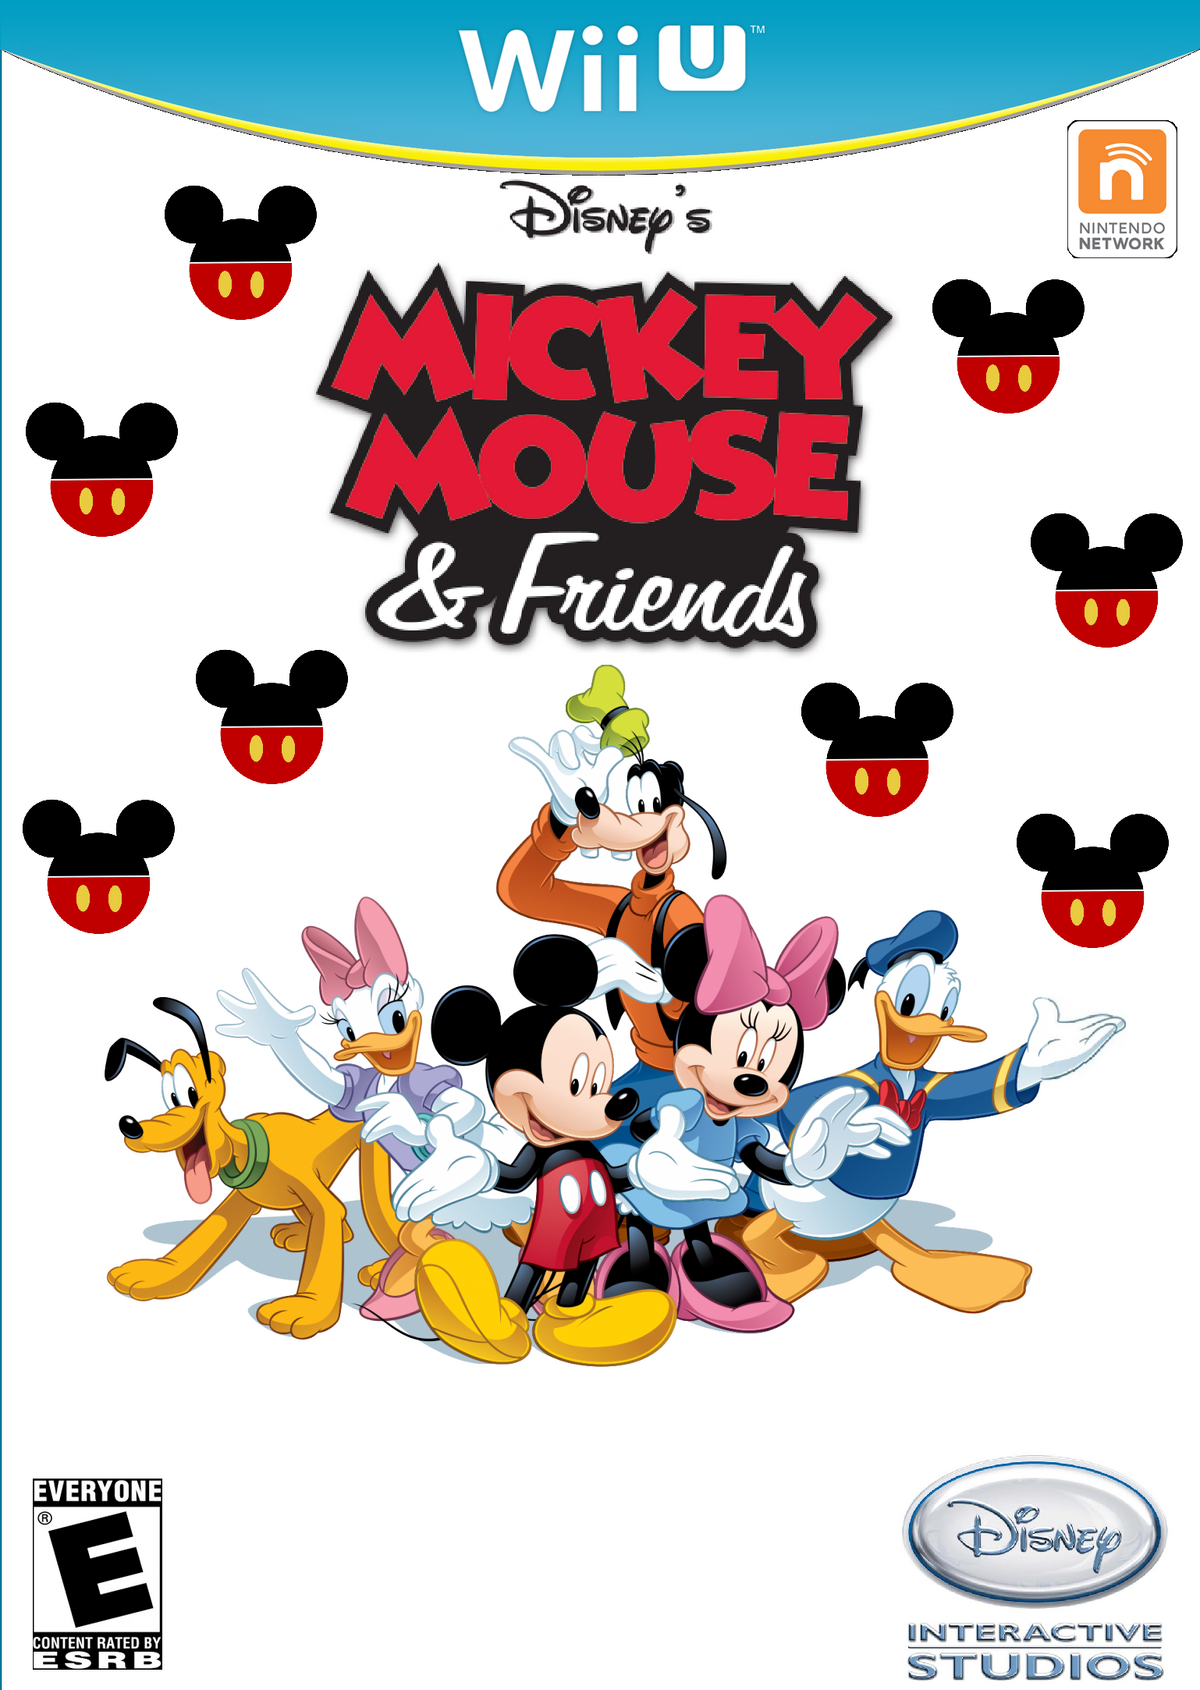 https://static.wikia.nocookie.net/videogamefanon/images/c/c7/Disney%27s_Mickey_Mouse_and_Friends_Video_Game_Boxart.png/revision/latest/scale-to-width-down/1200?cb=20190216033650